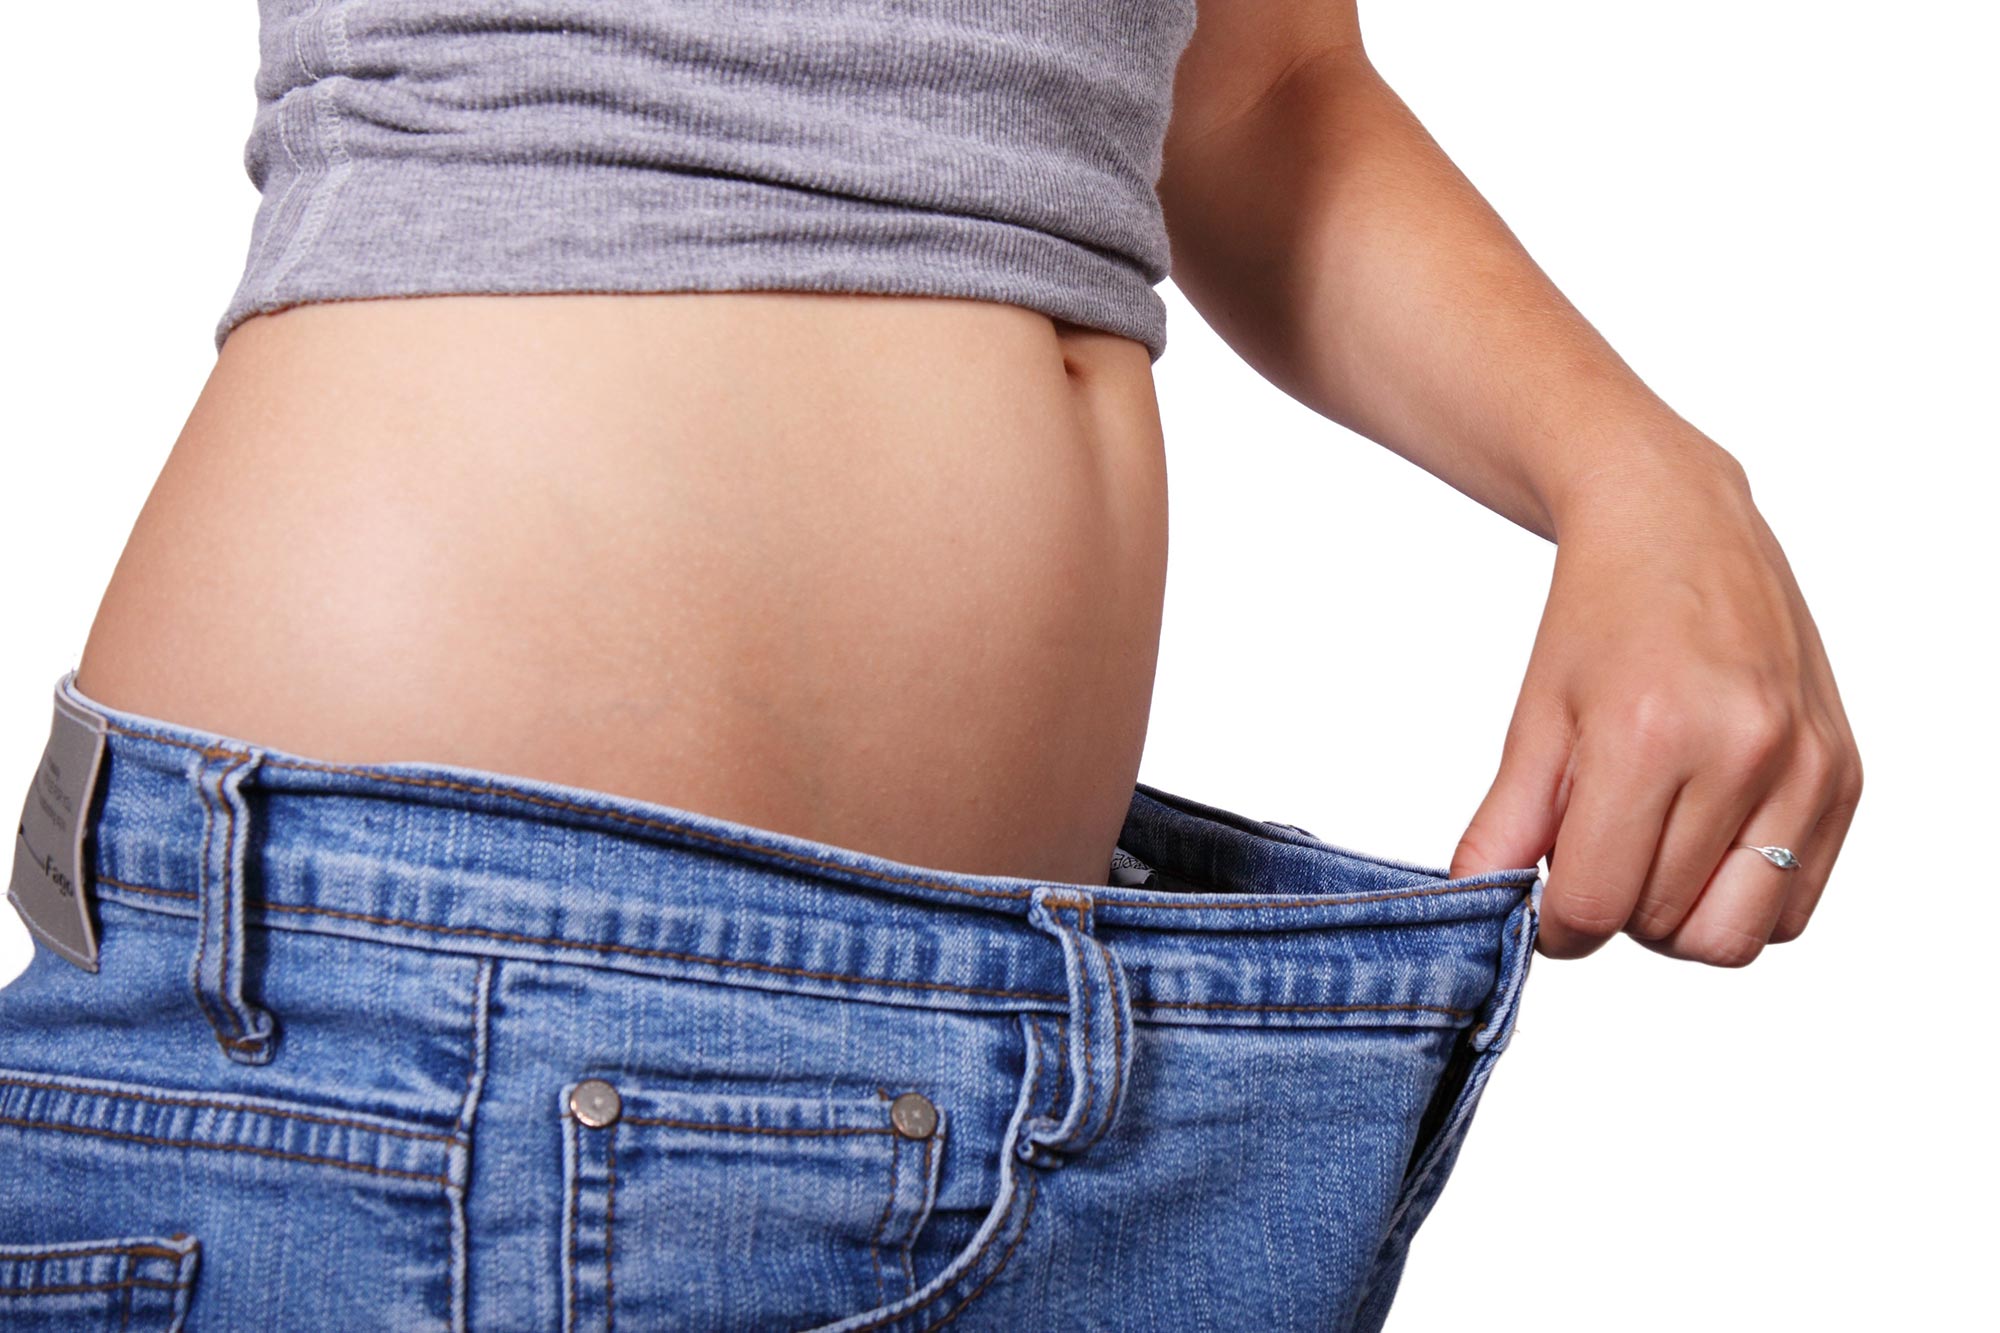 Obesity treatment in india